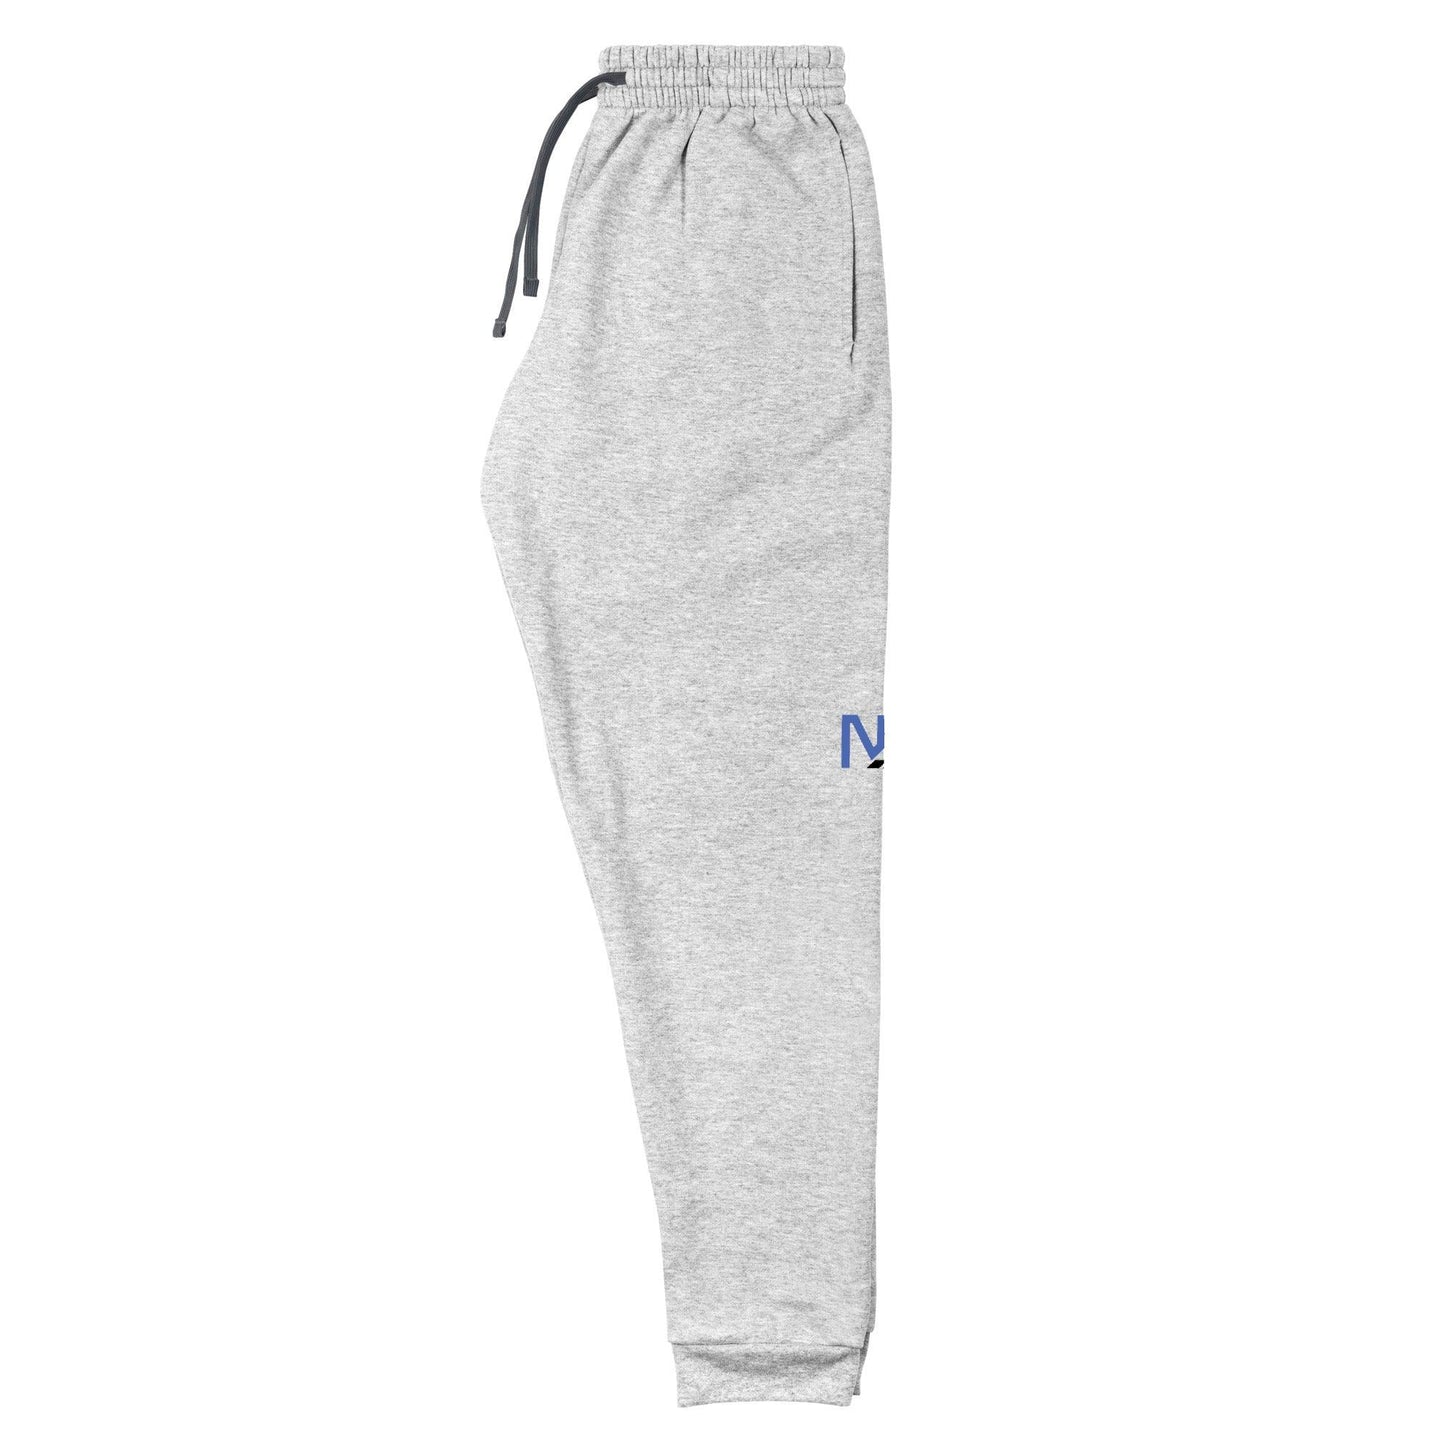 Nate Sestina "NS7" Joggers - Fan Arch